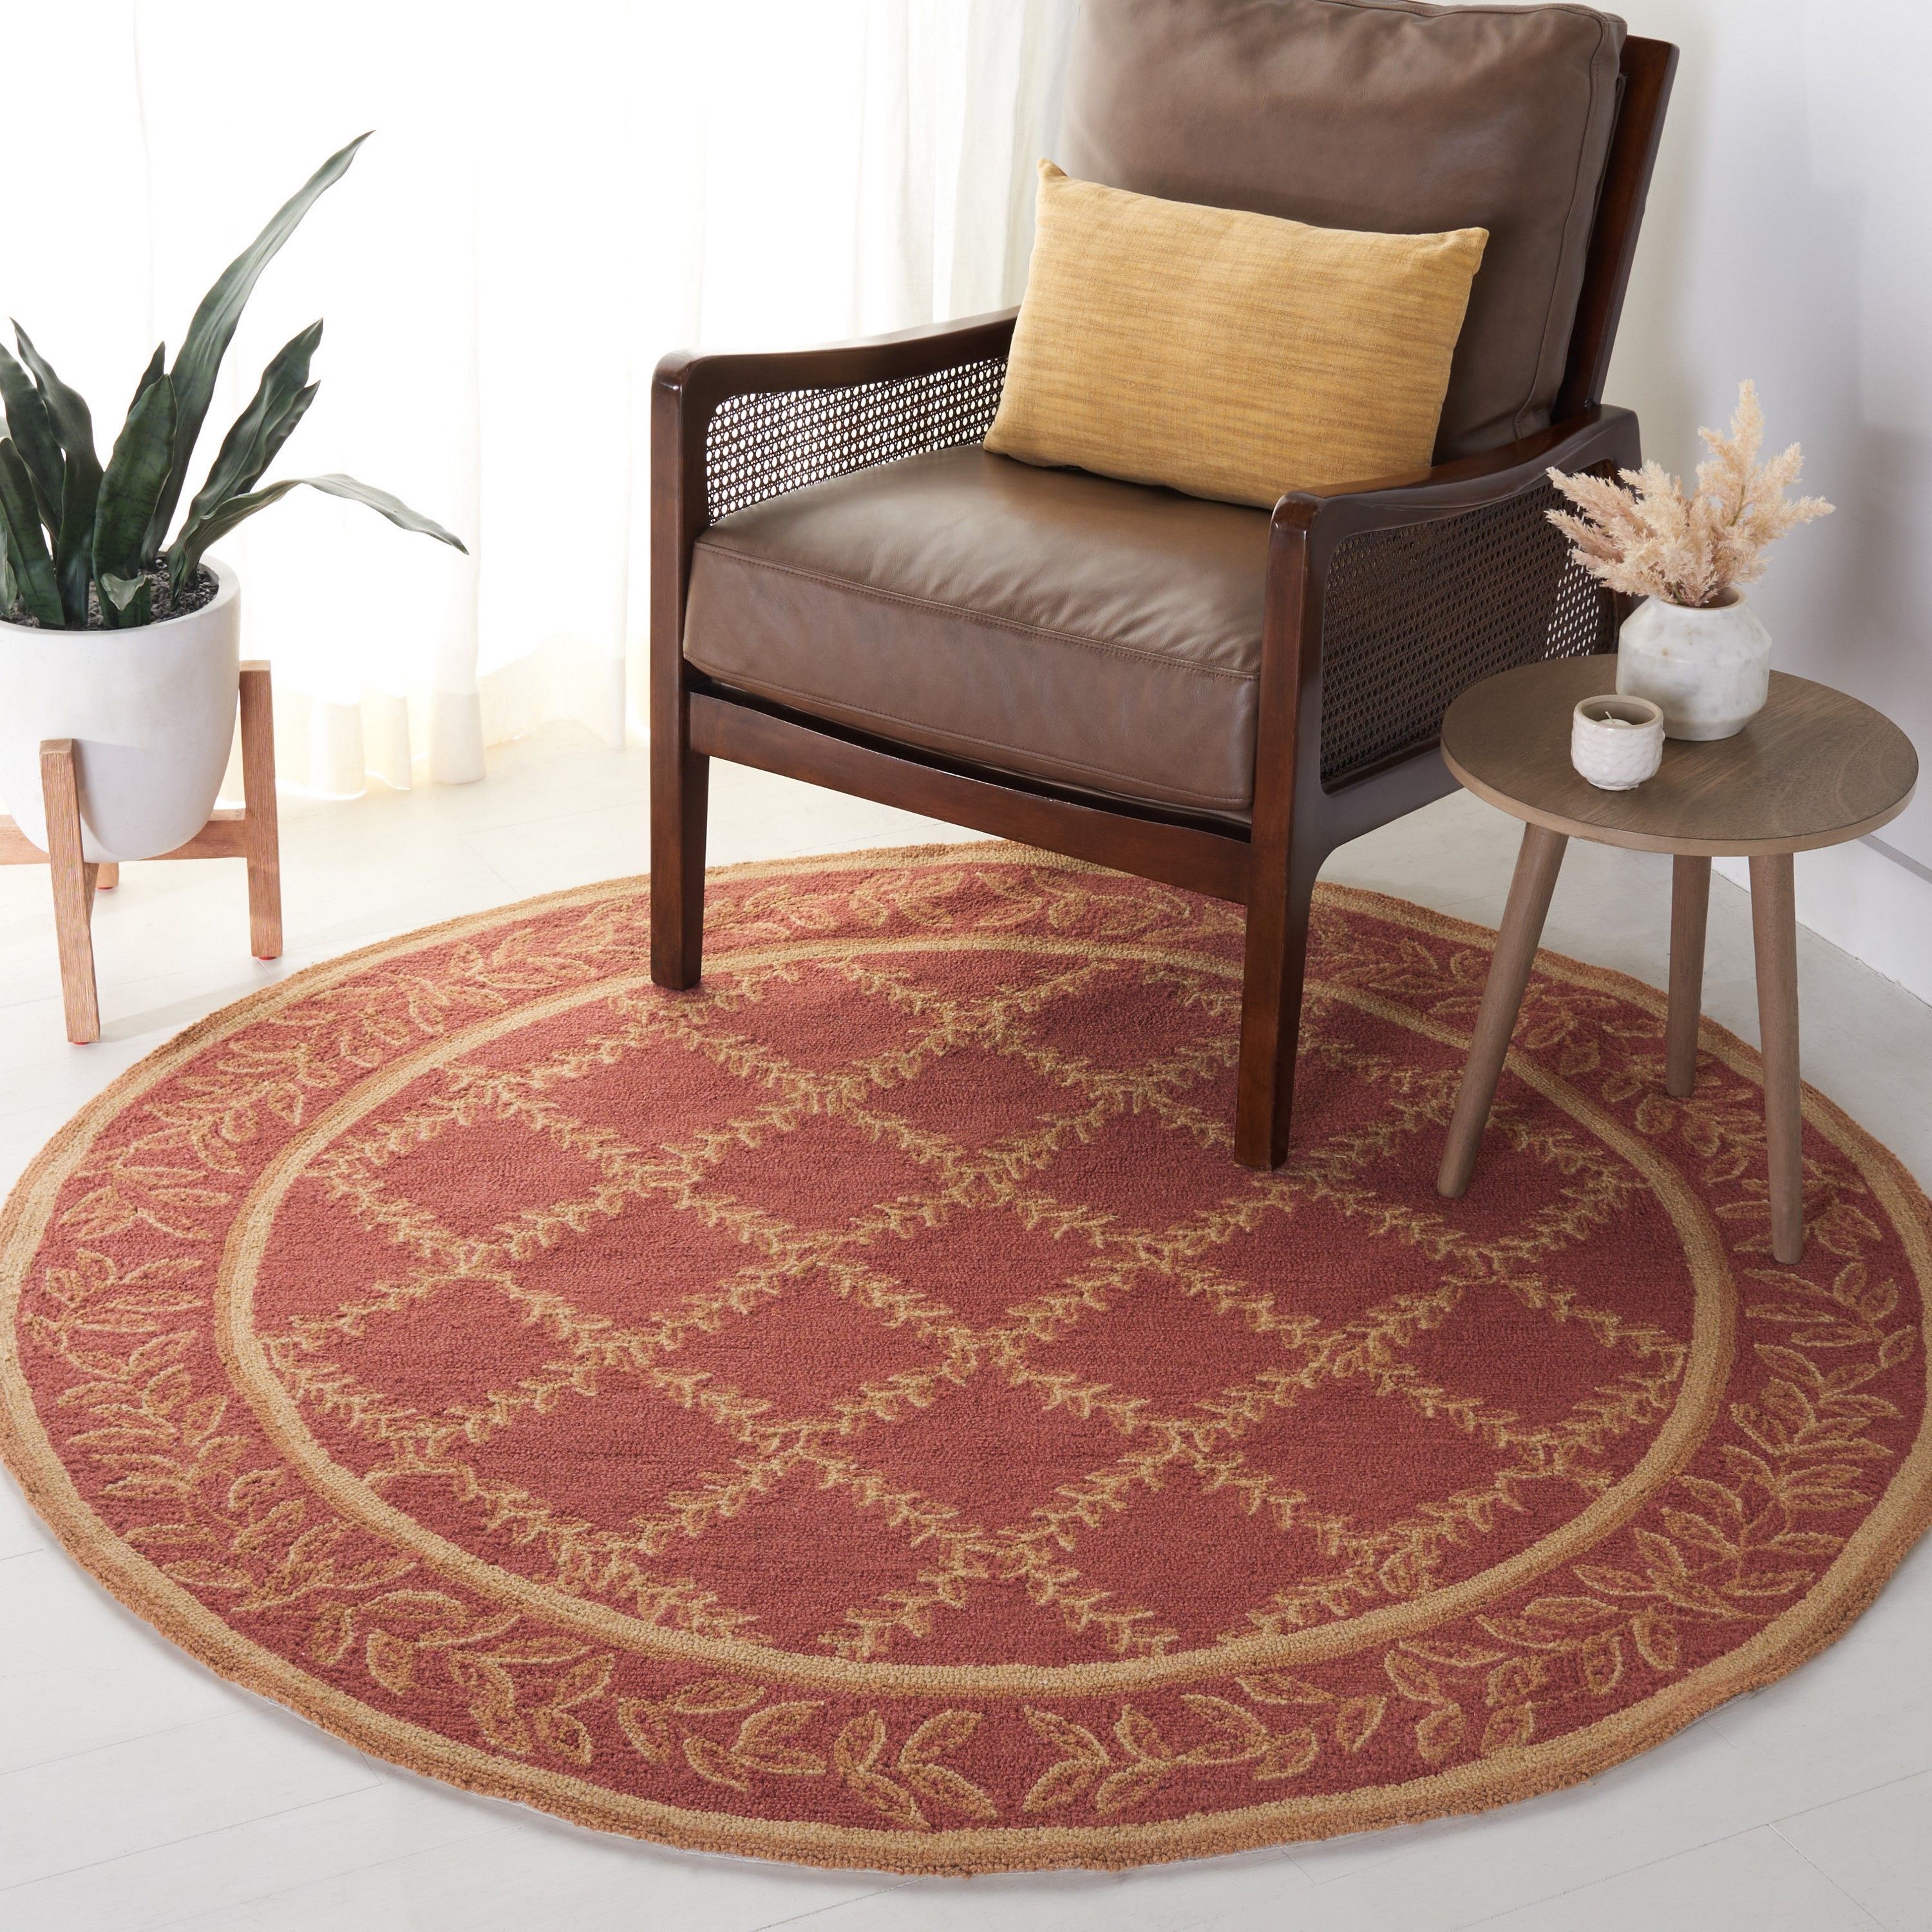 Safavieh Chelsea Lattice 8 X 10 Wool Rust/gold Oval Indoor Trellis Area Rug  In The Rugs Department At Lowes Intended For Lattice Oval Rugs (Photo 4 of 15)